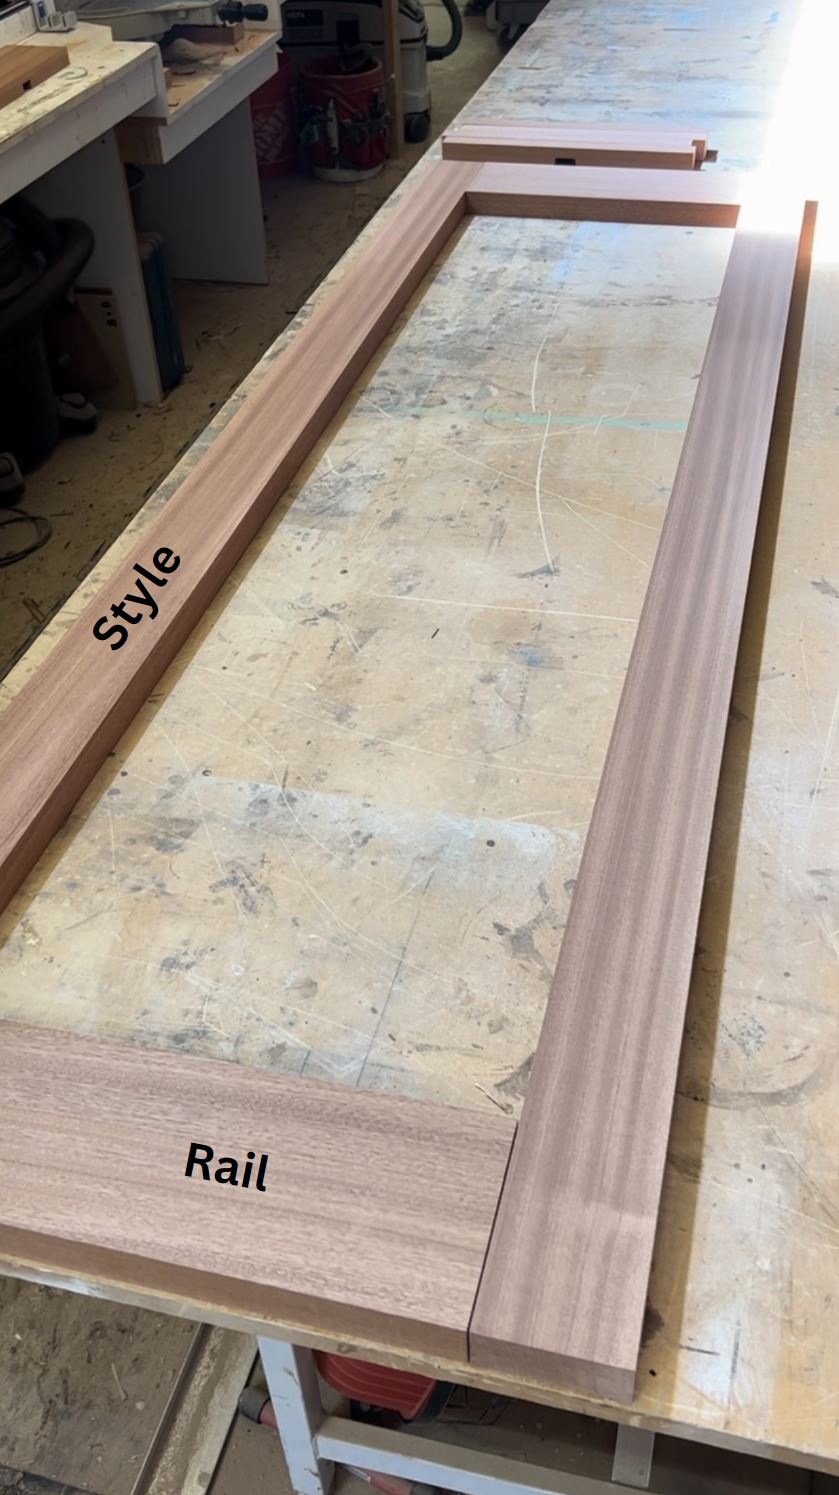 milling the wood to the correct lengths for the rails and styles of the French doors